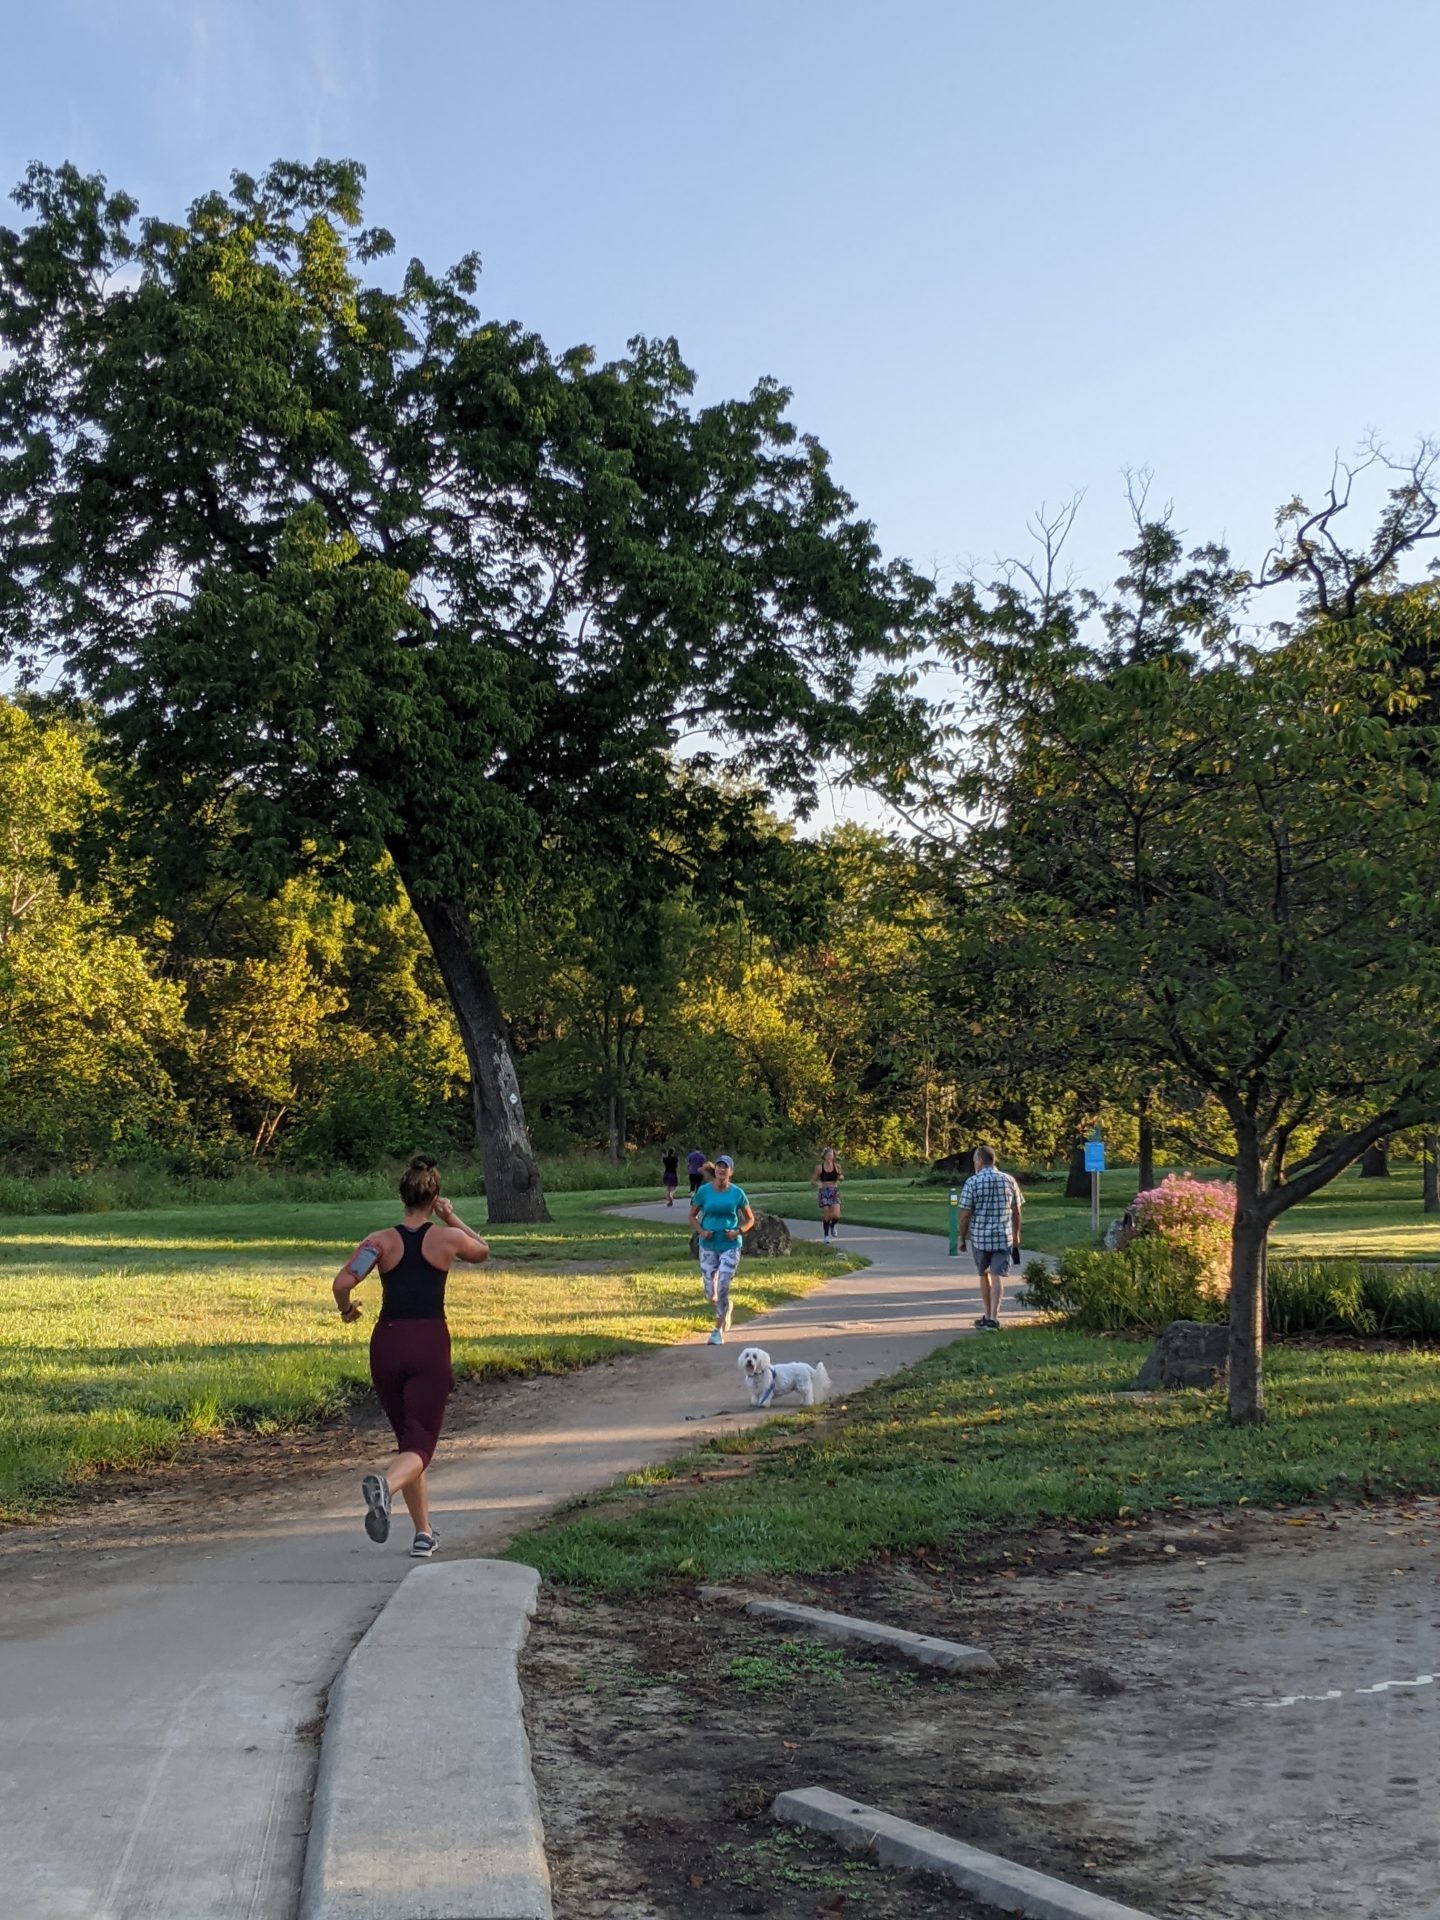 Park users along the Roanoke River Greenway